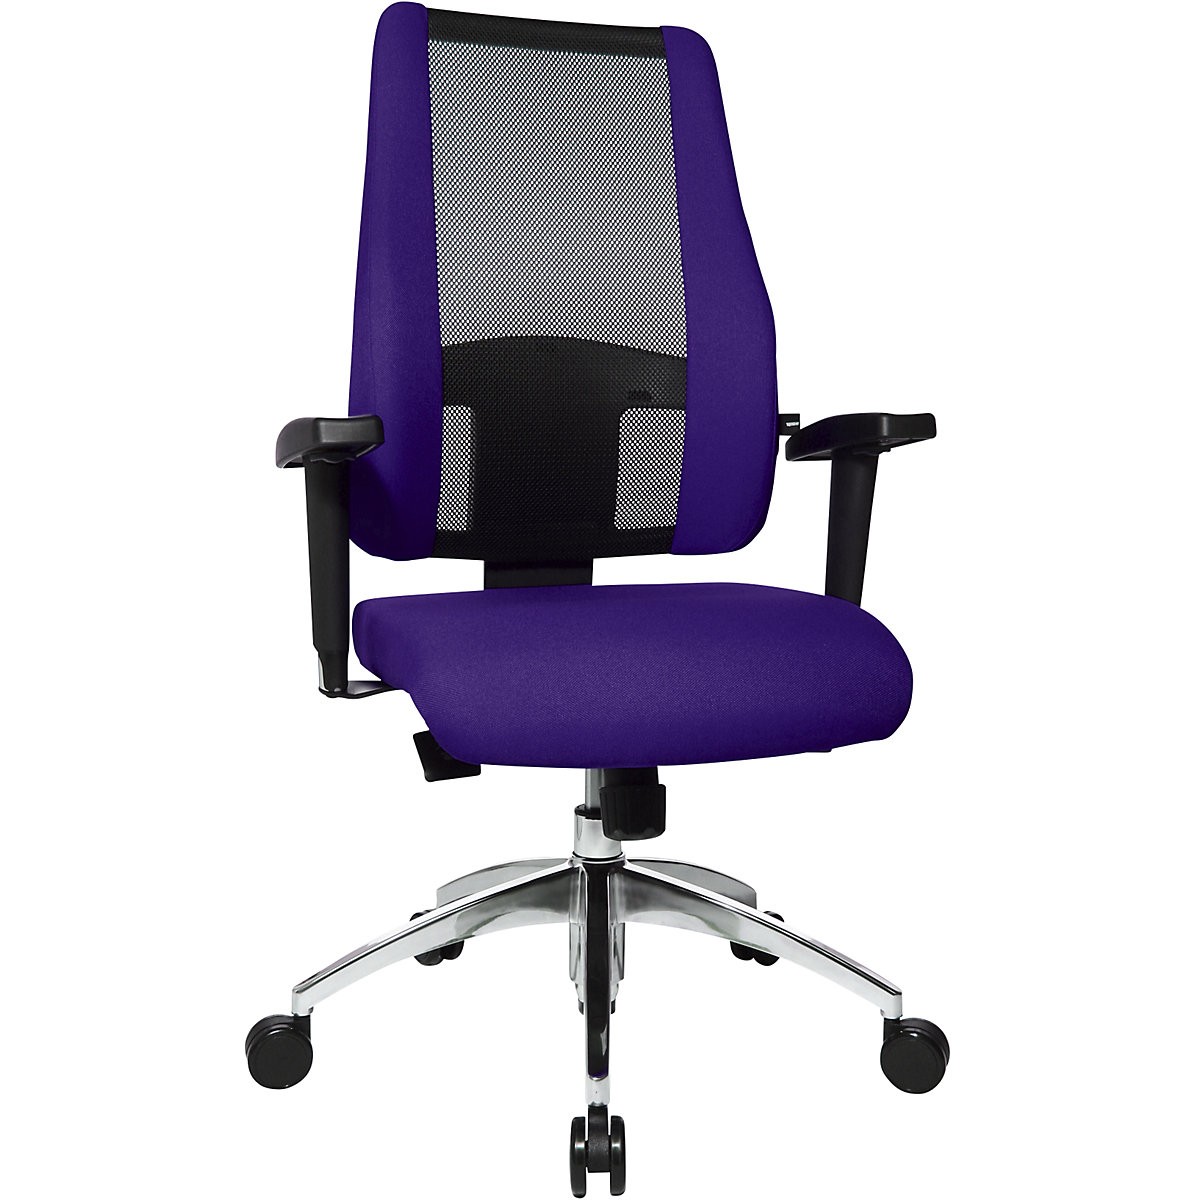 AIR SYNCRO office swivel chair – Topstar, mesh back rest with padded side parts, black / purple-6